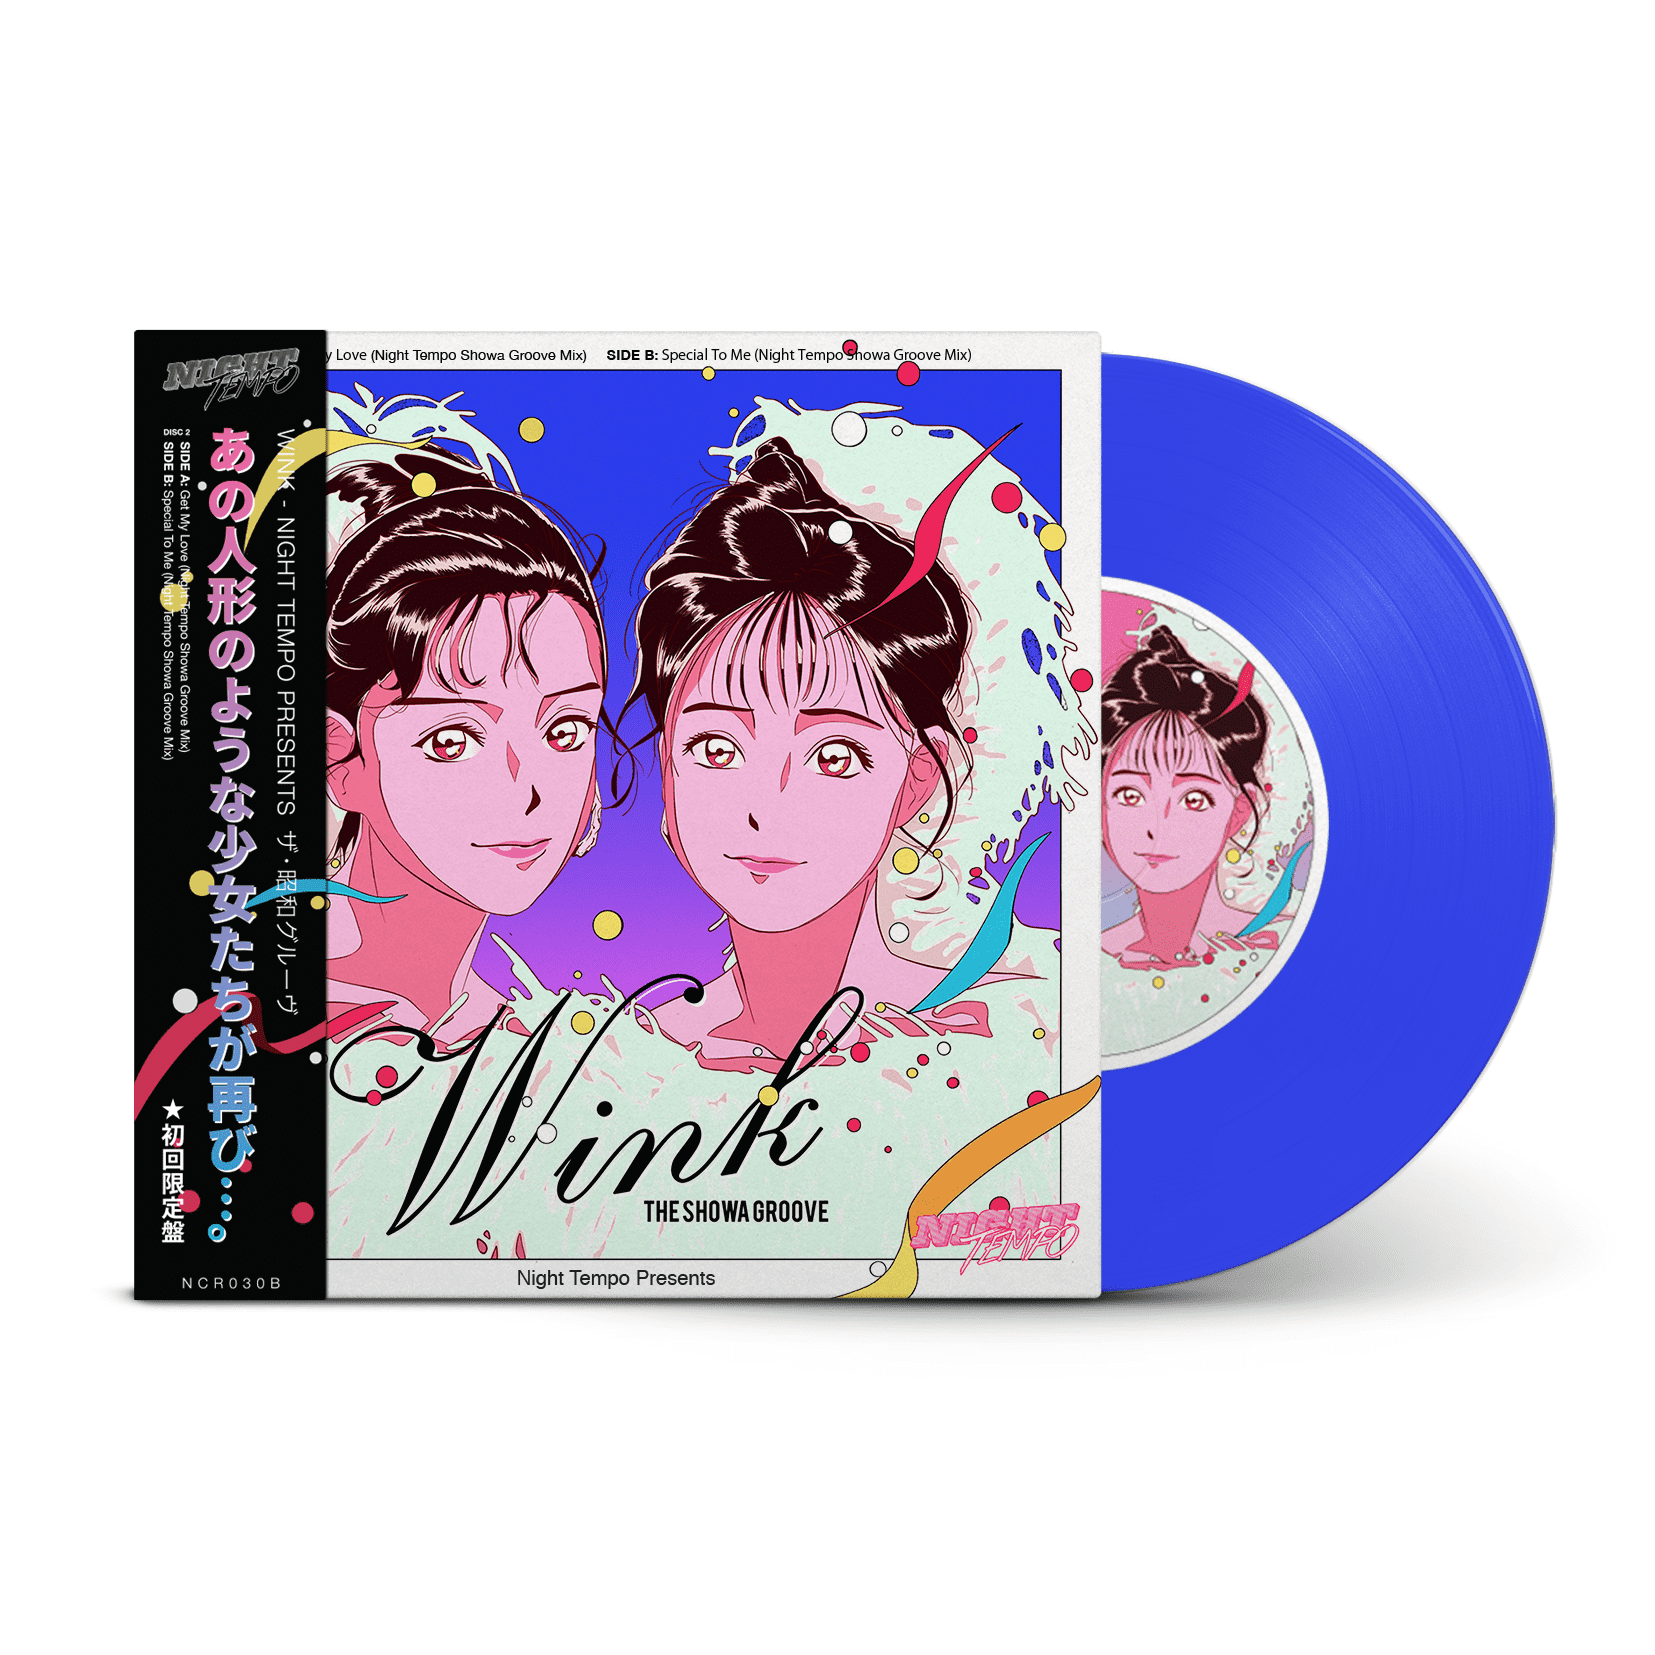 Wink - Night Tempo presents The Showa Groove EP2 Limited Edition 7" Vinyl (Pre-Order) - Neoncity Records